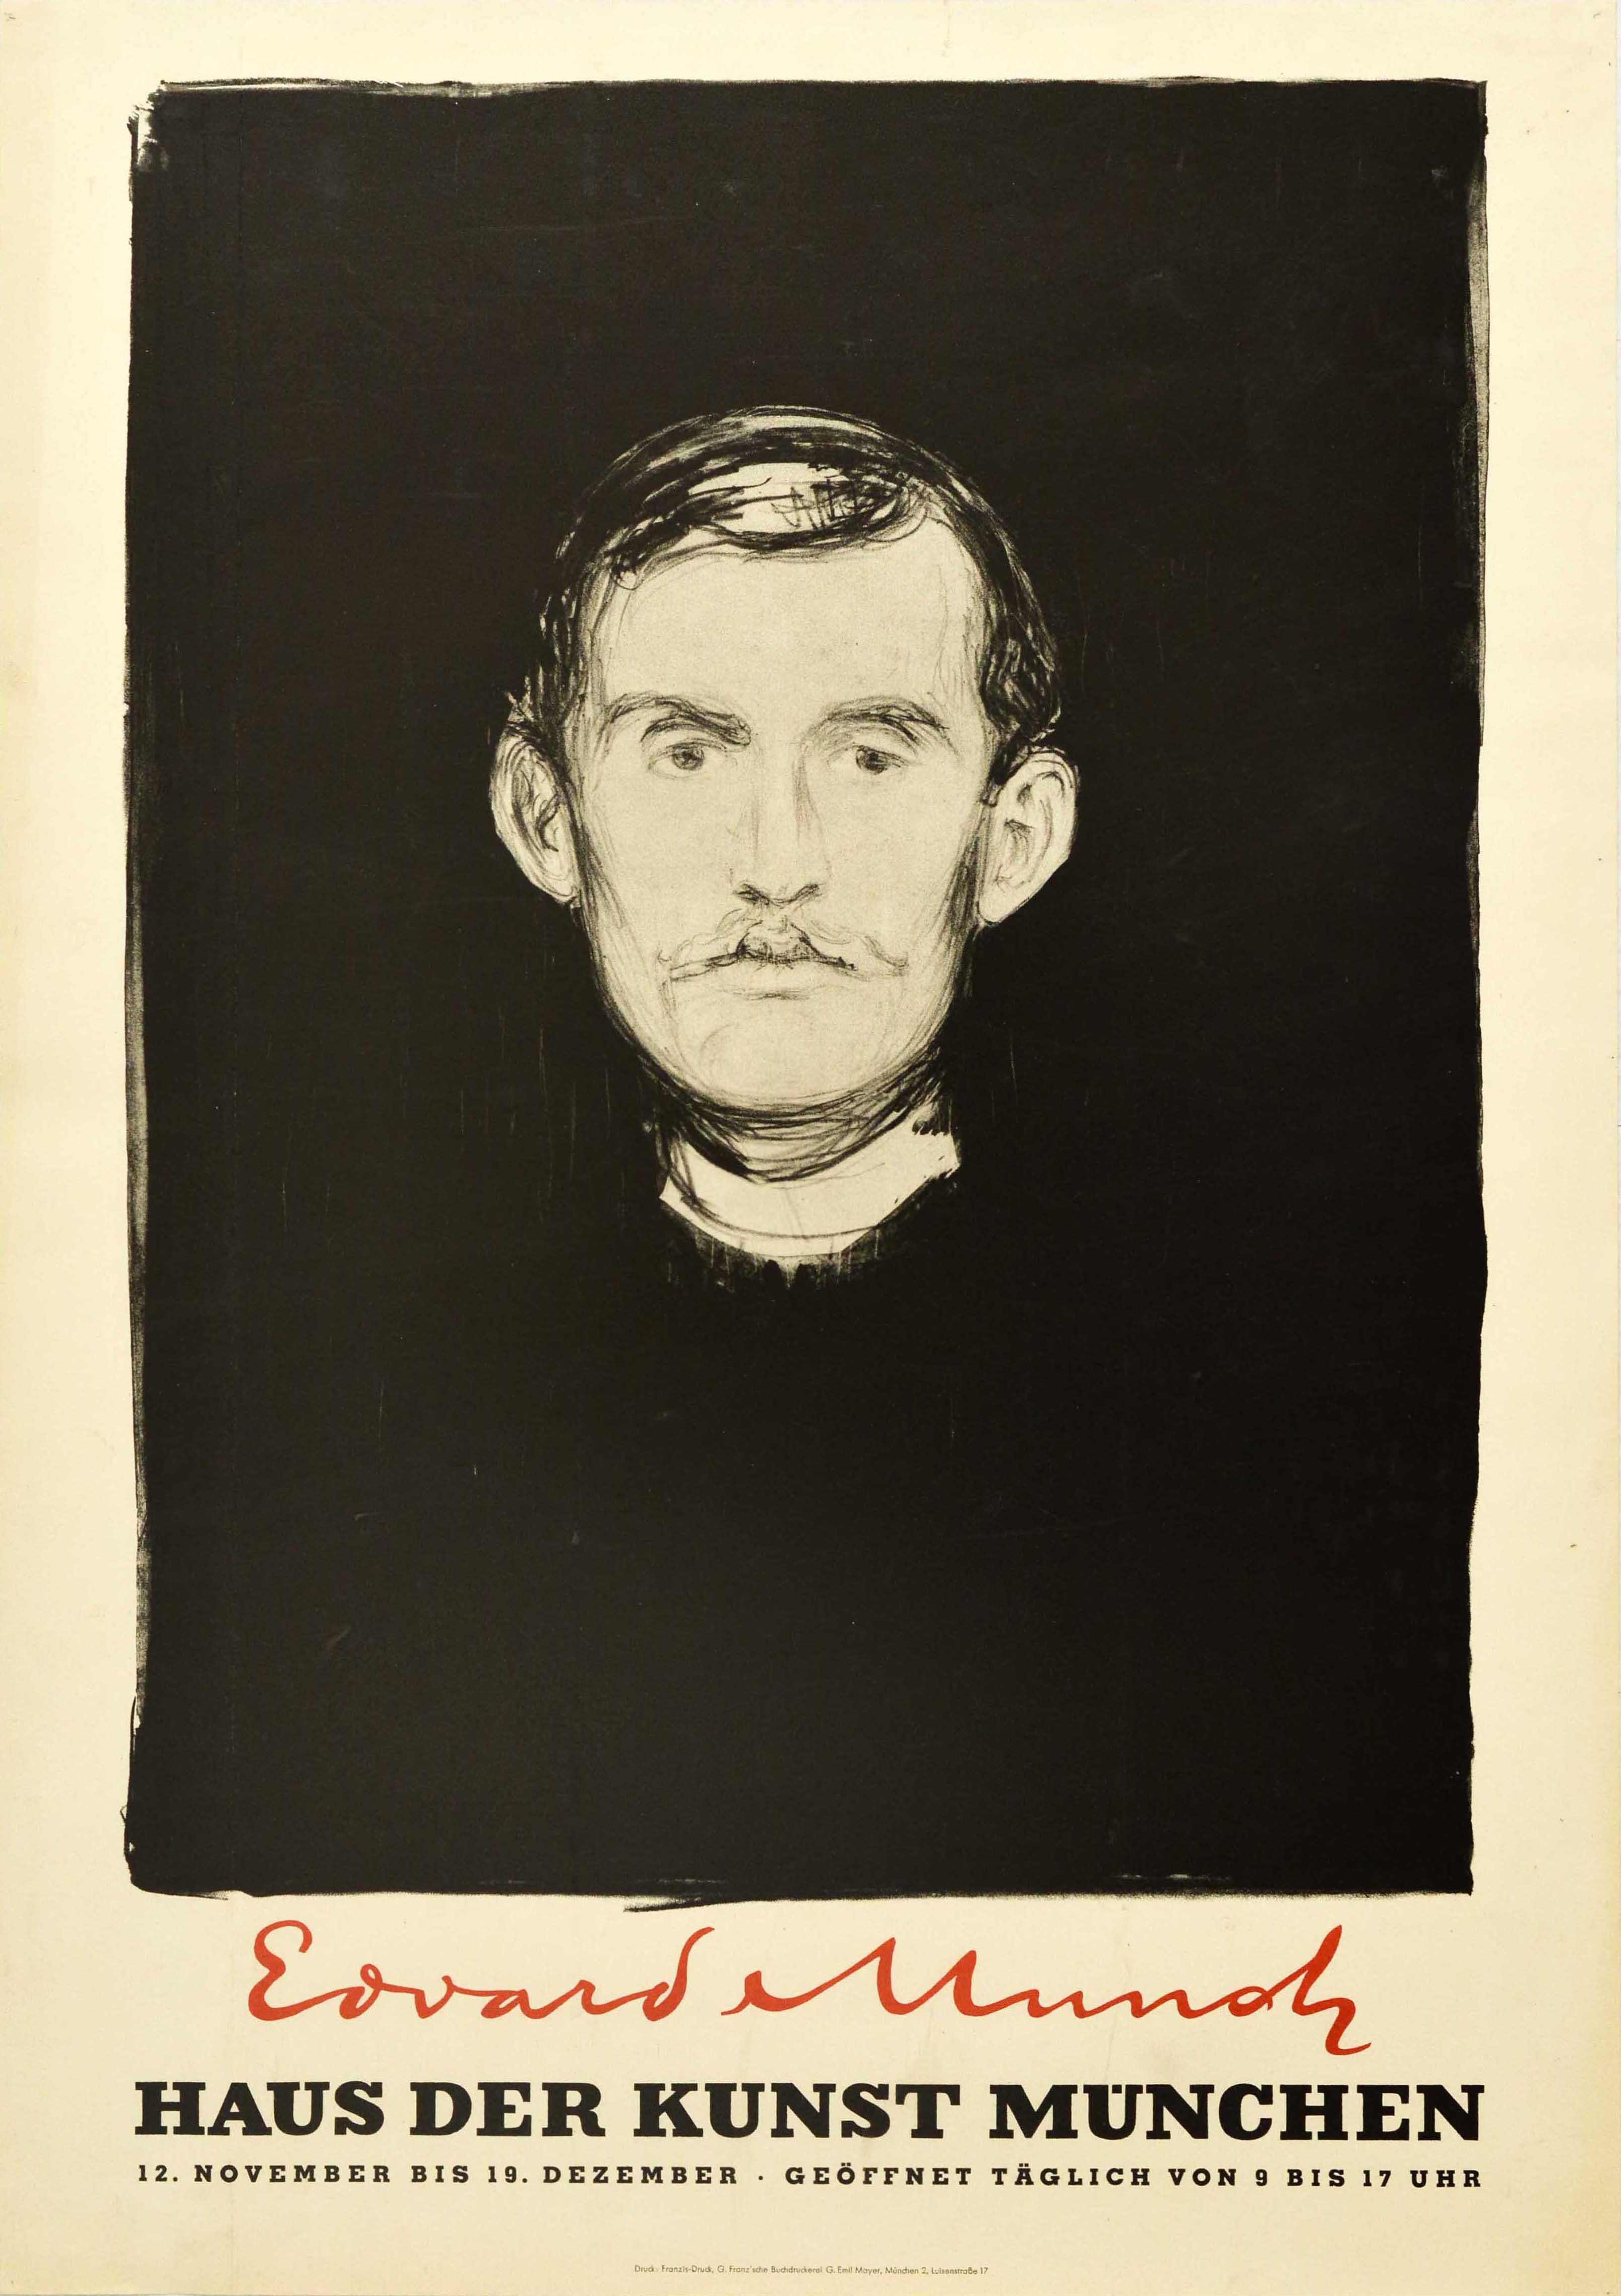 Original vintage advertising poster for an Edvard Munch exhibition held at the Haus der Kunst museum in Munich from 12 November to 19 December featuring Munch's 1895 needle and ink self-portrait depicting himself looking at the viewer set over a